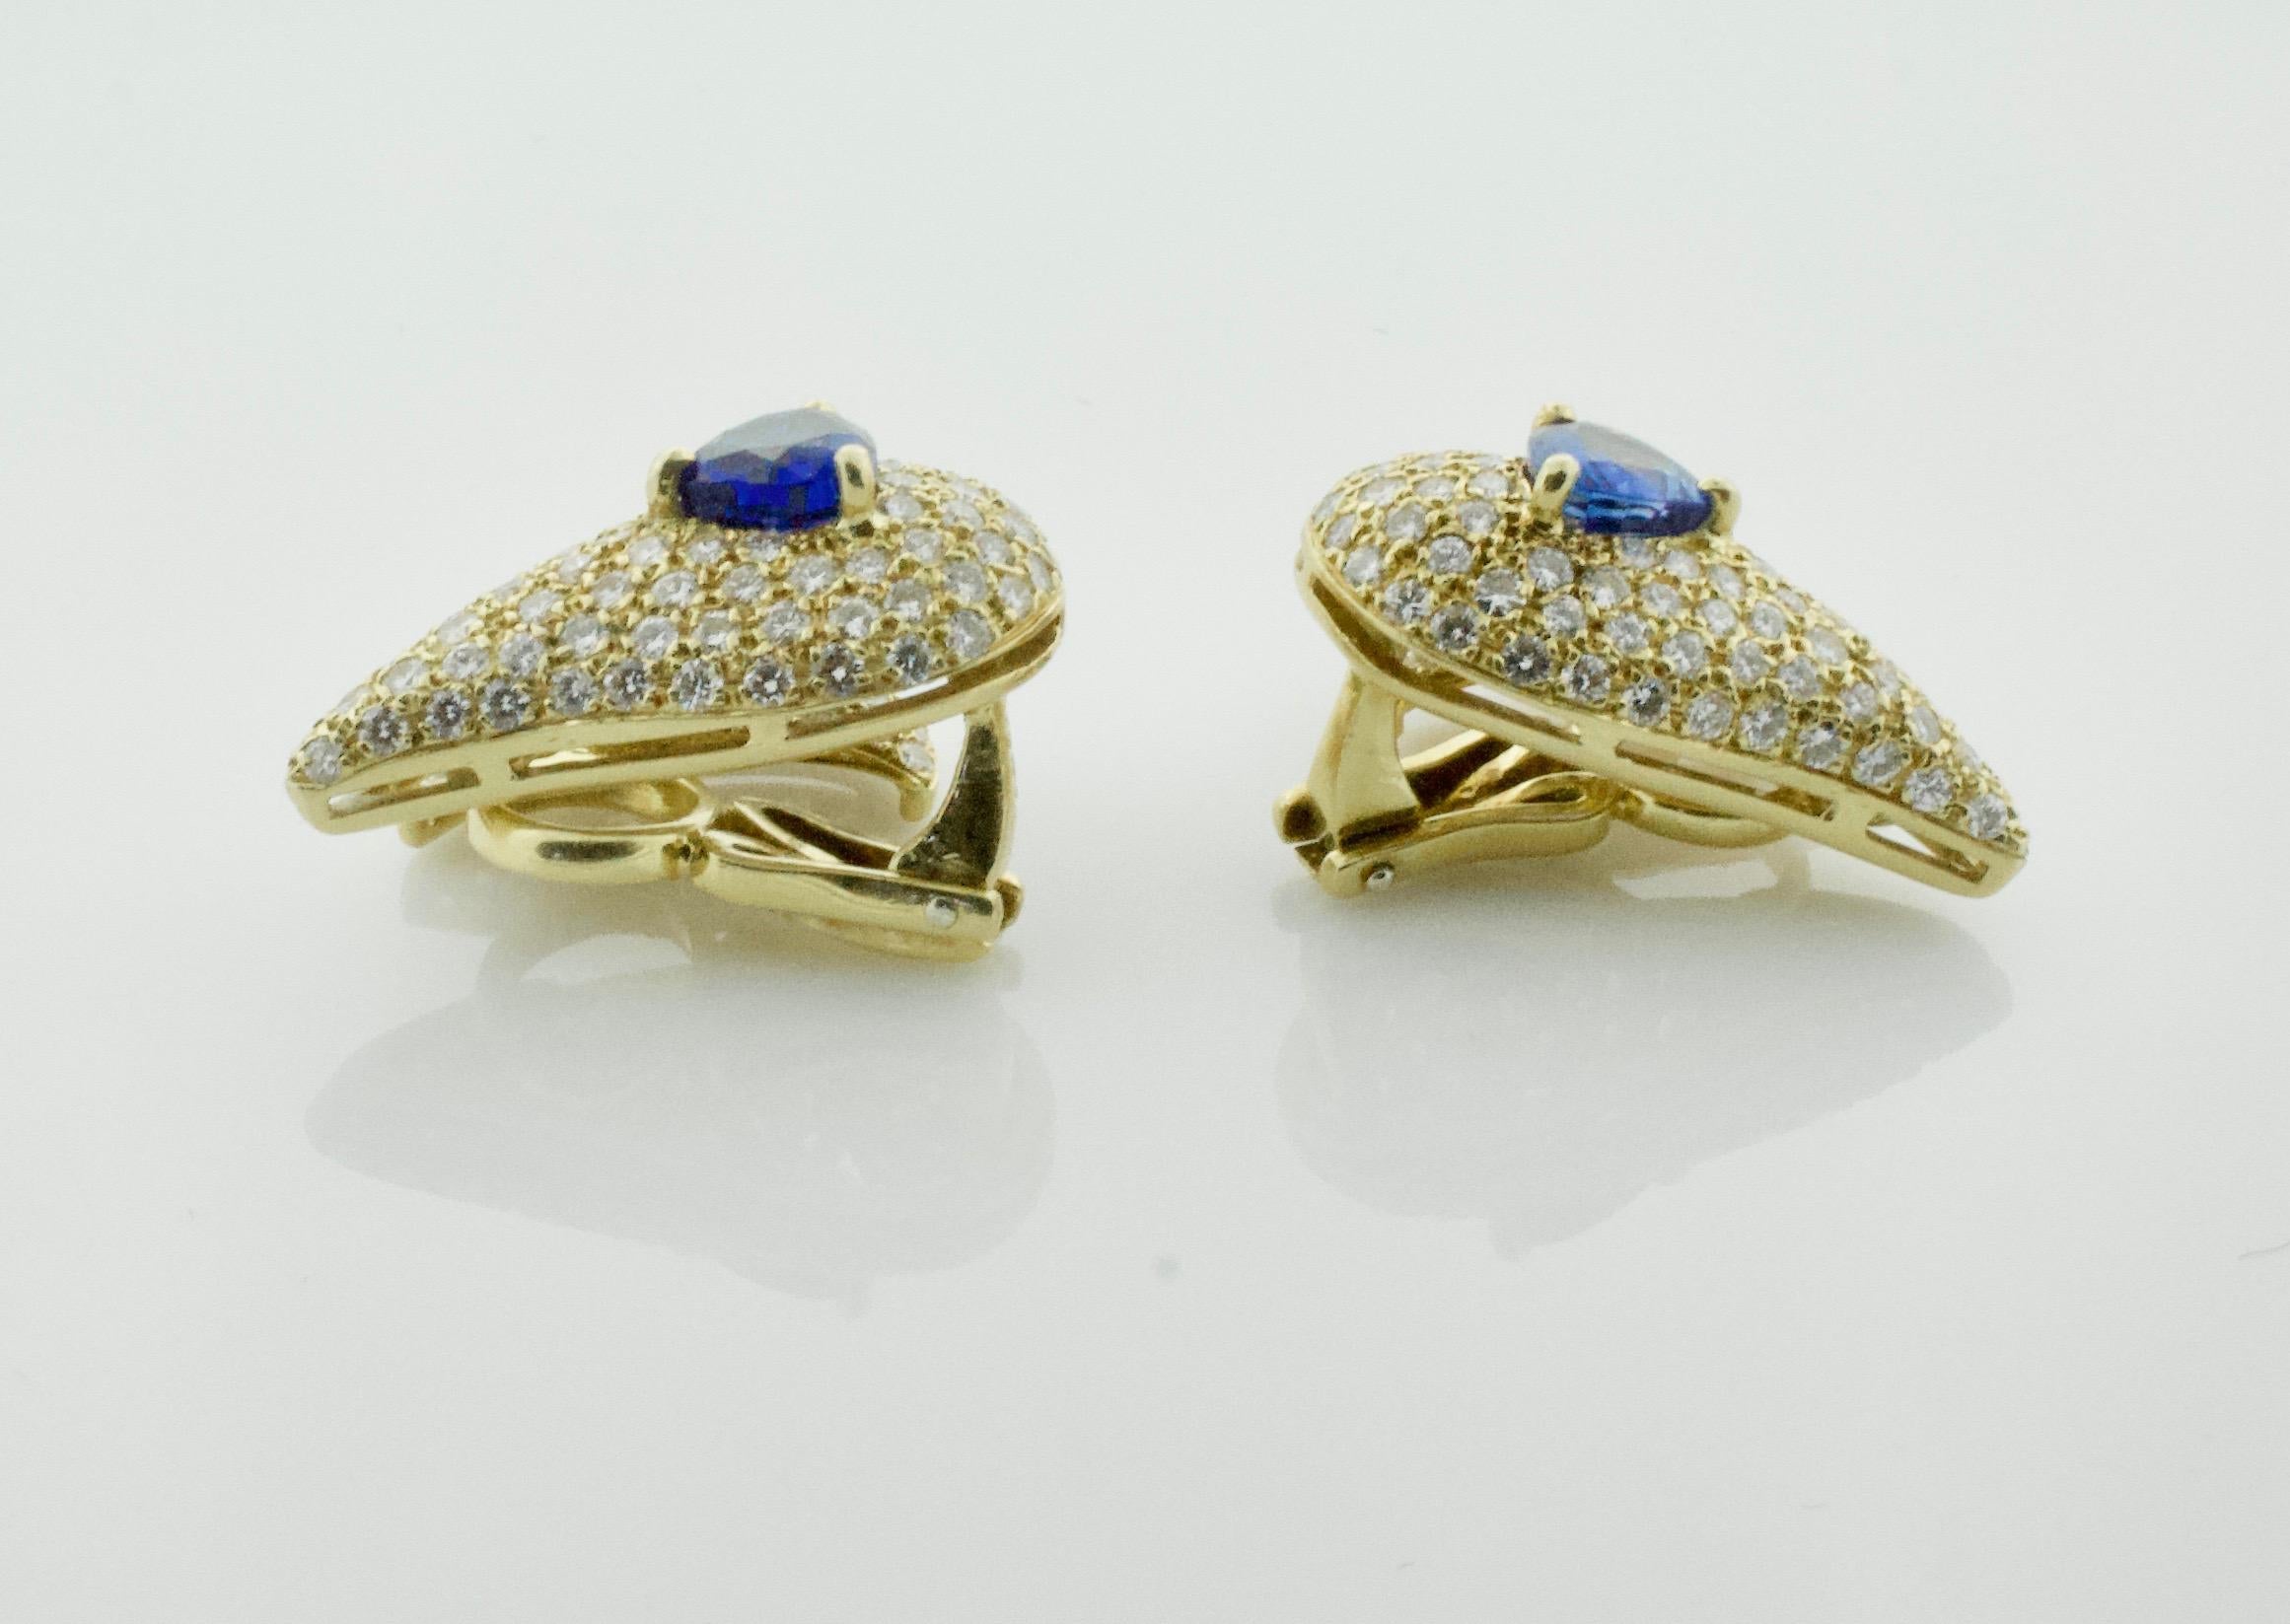 Round Cut Sabbadini Unique Sapphire and Diamond Earrings in 18k Sap = 3.00 Dia = 7.00 cts. For Sale